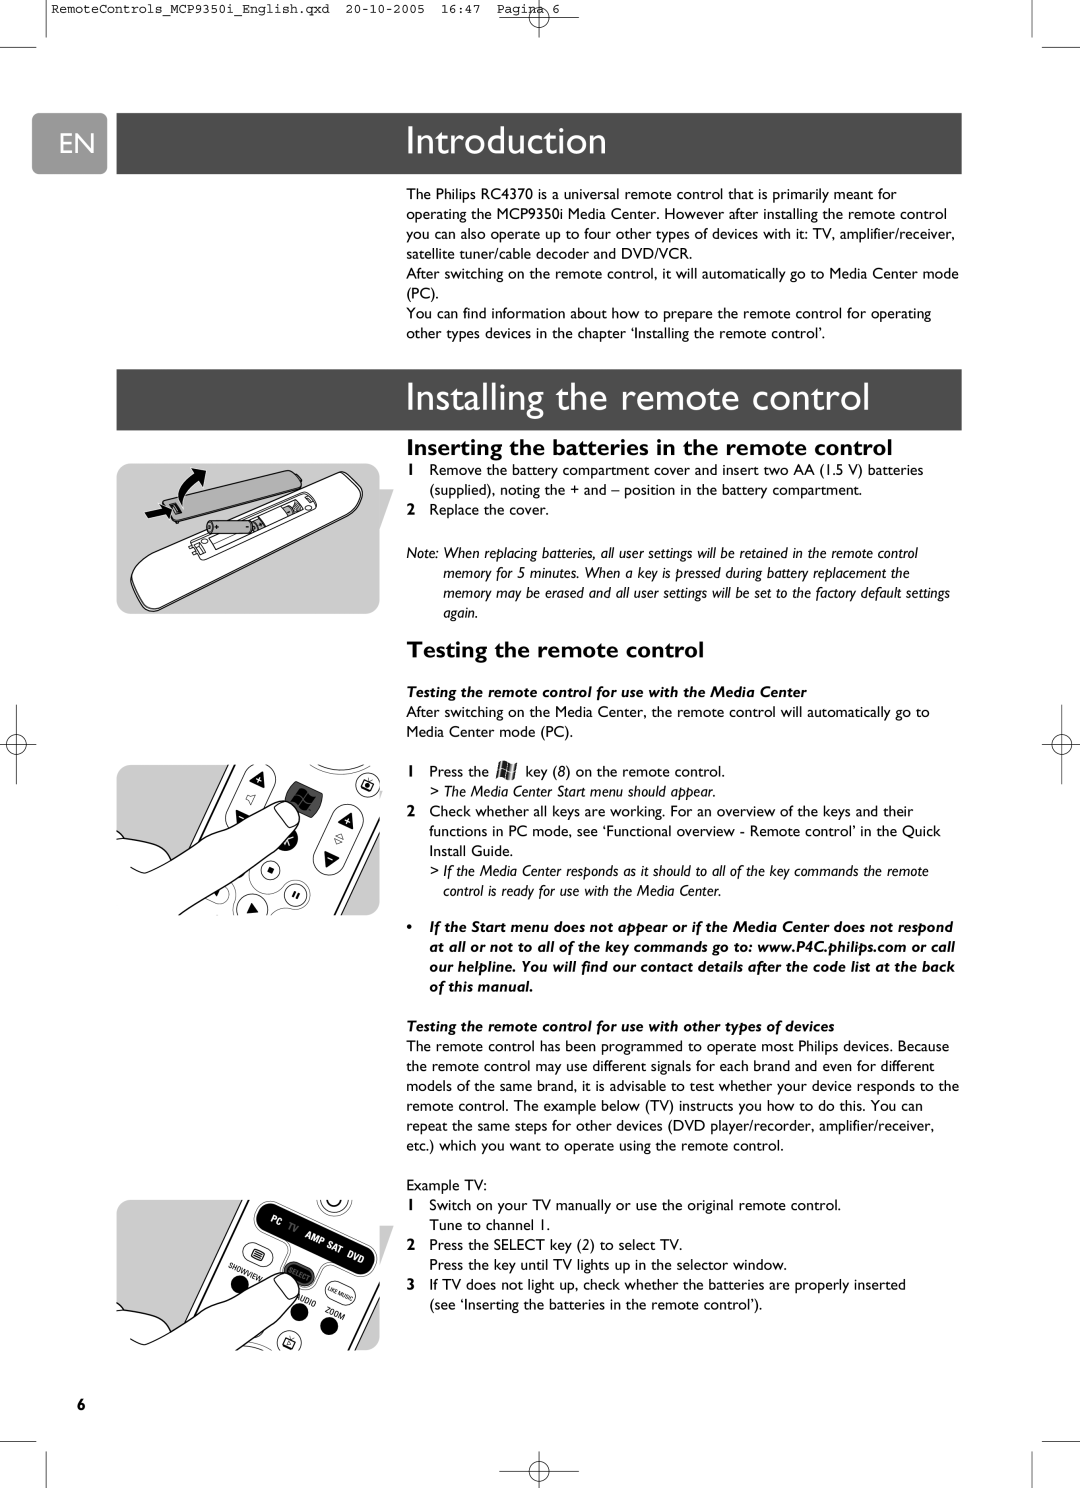 Philips RC4370 user manual ENIntroduction, Installing the remote control, Inserting the batteries in the remote control 